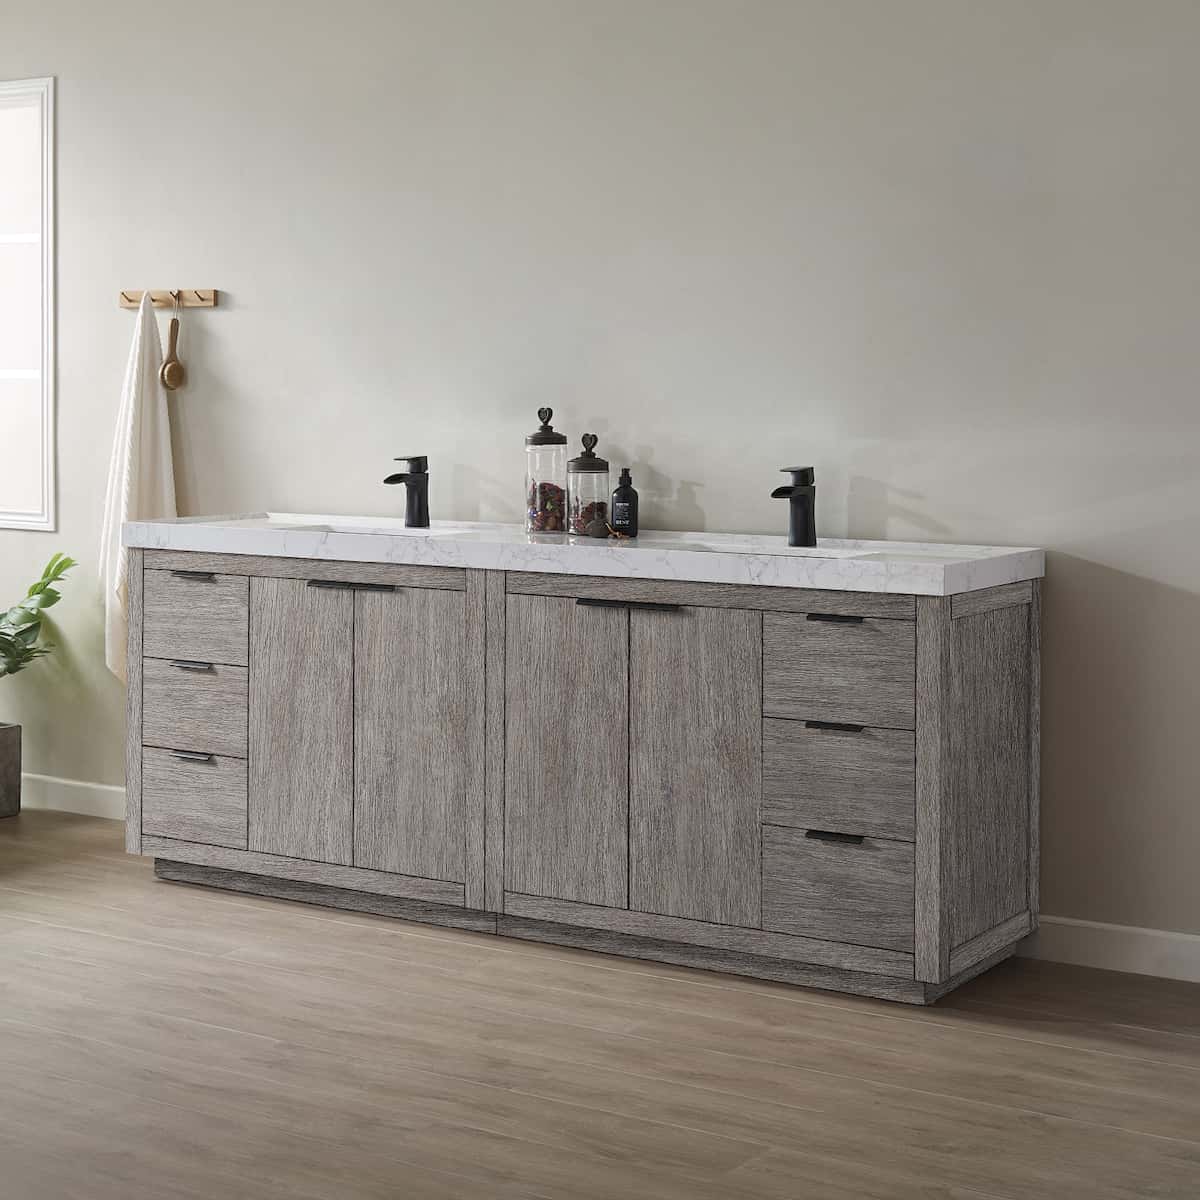 Vinnova Leiza 84 Inch Freestanding Double Vanity in Classical Grey with White Composite Grain Countertop Without Mirrors Side 701584-CR-GW-NM